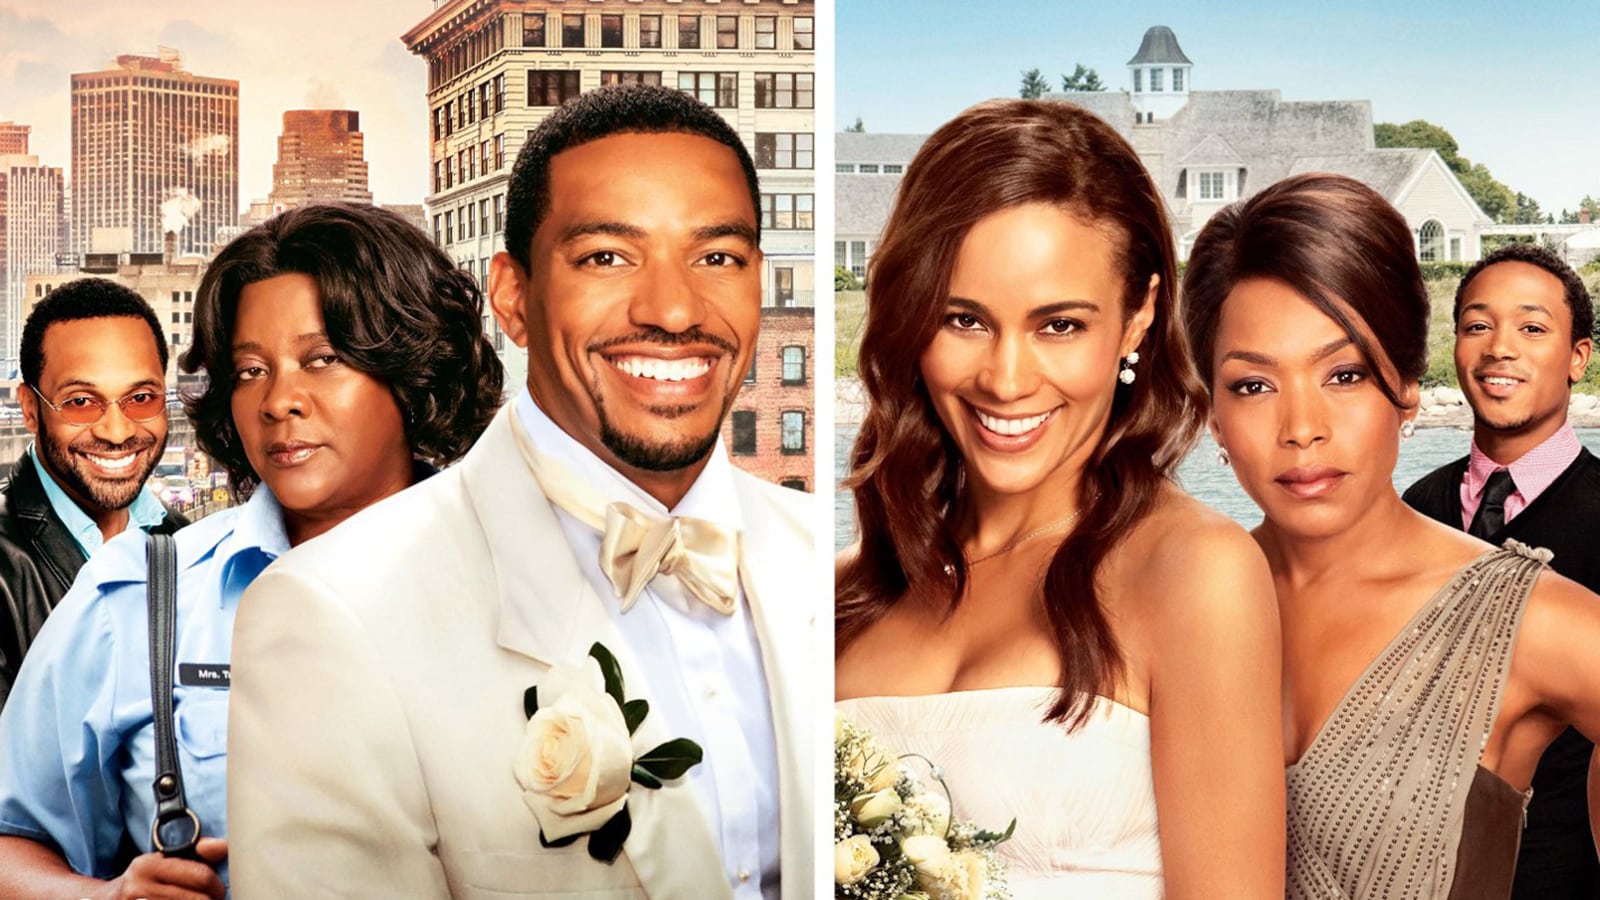 Index of /Movie/Jumping the Broom (2011)/Jumping.The.Broom.2011.1080p.Blu.....